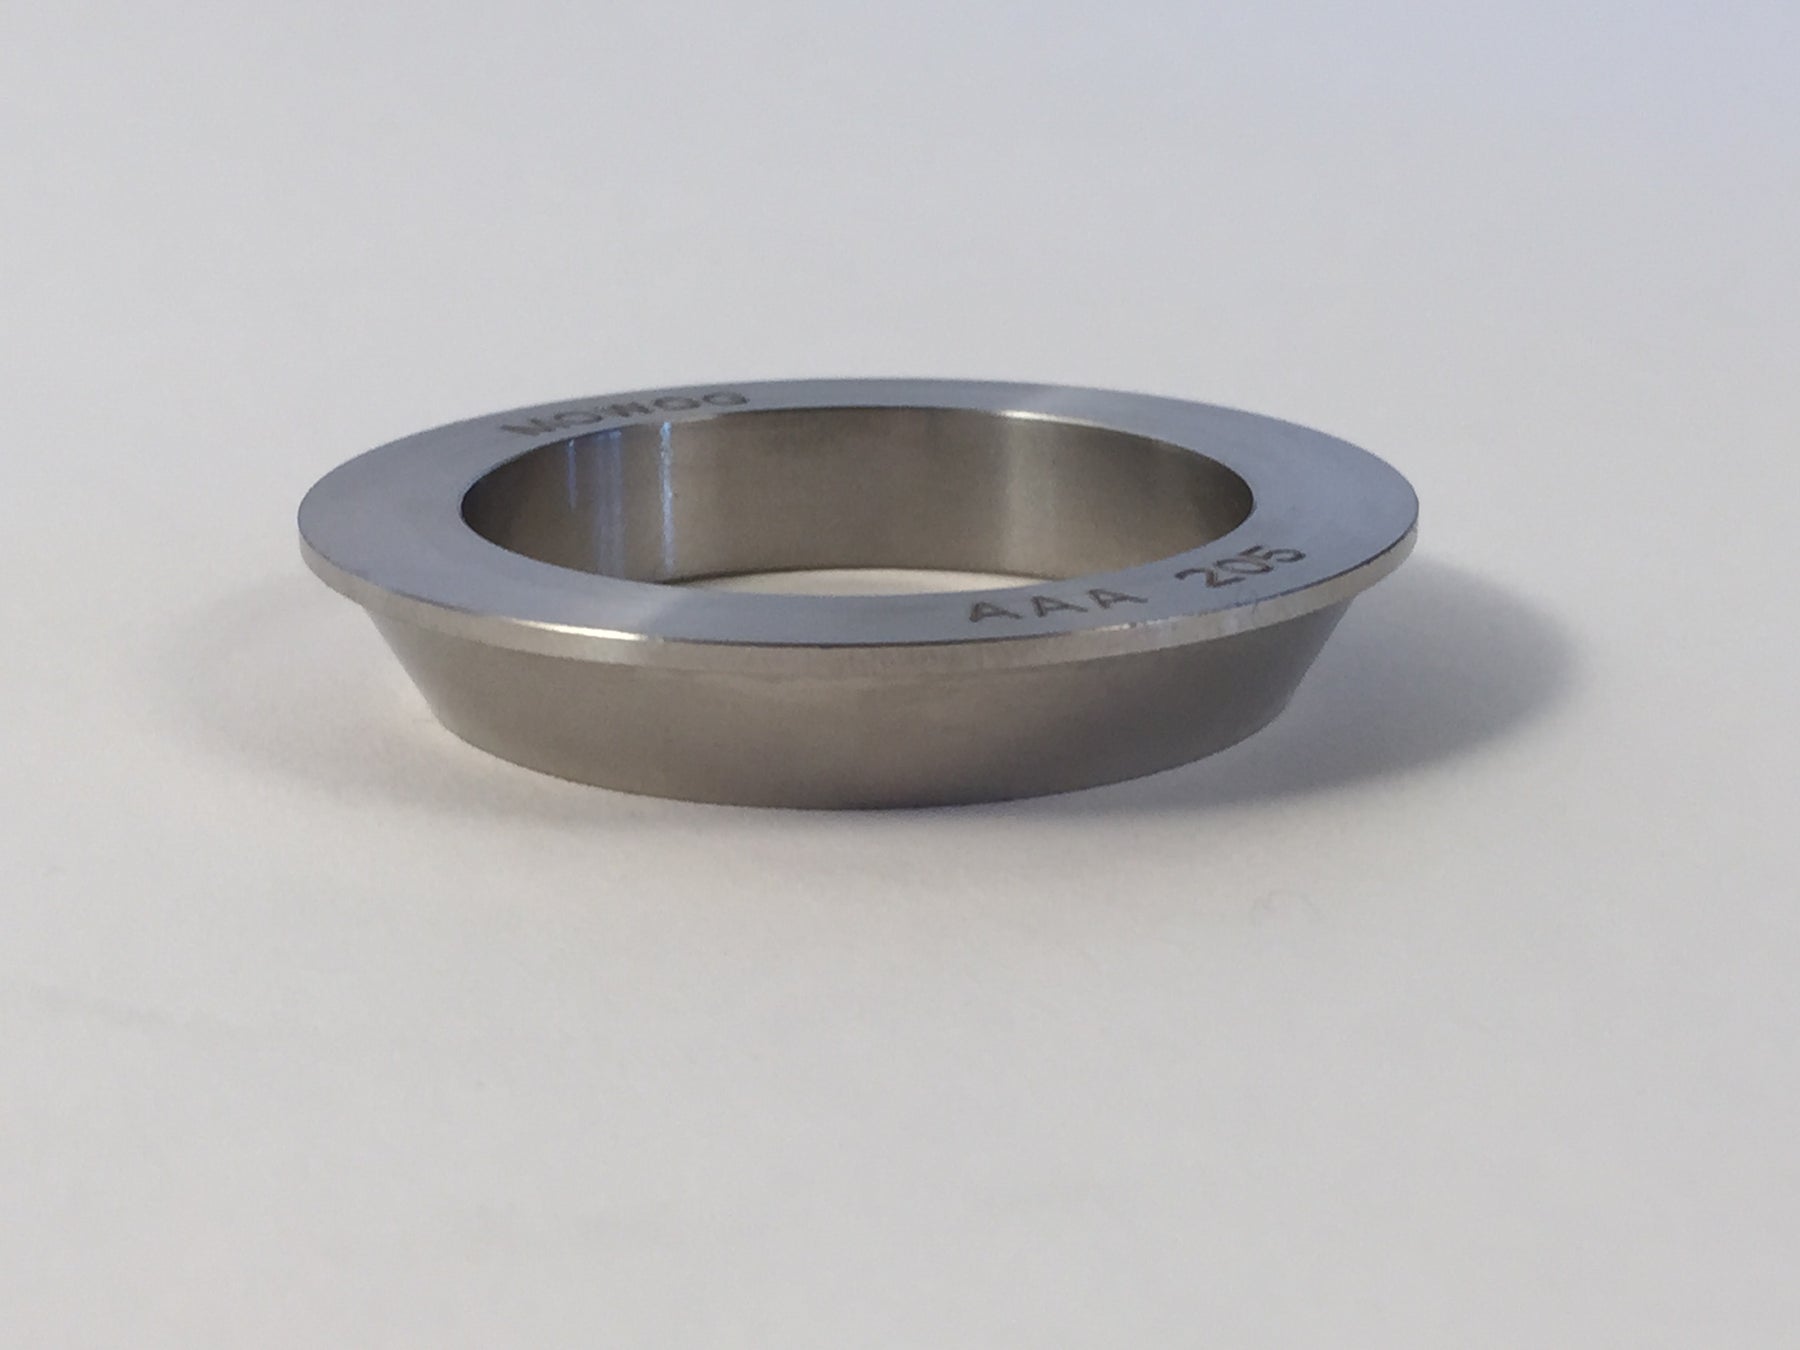 New Product Announcement: MG TC Exhaust Flange Washer